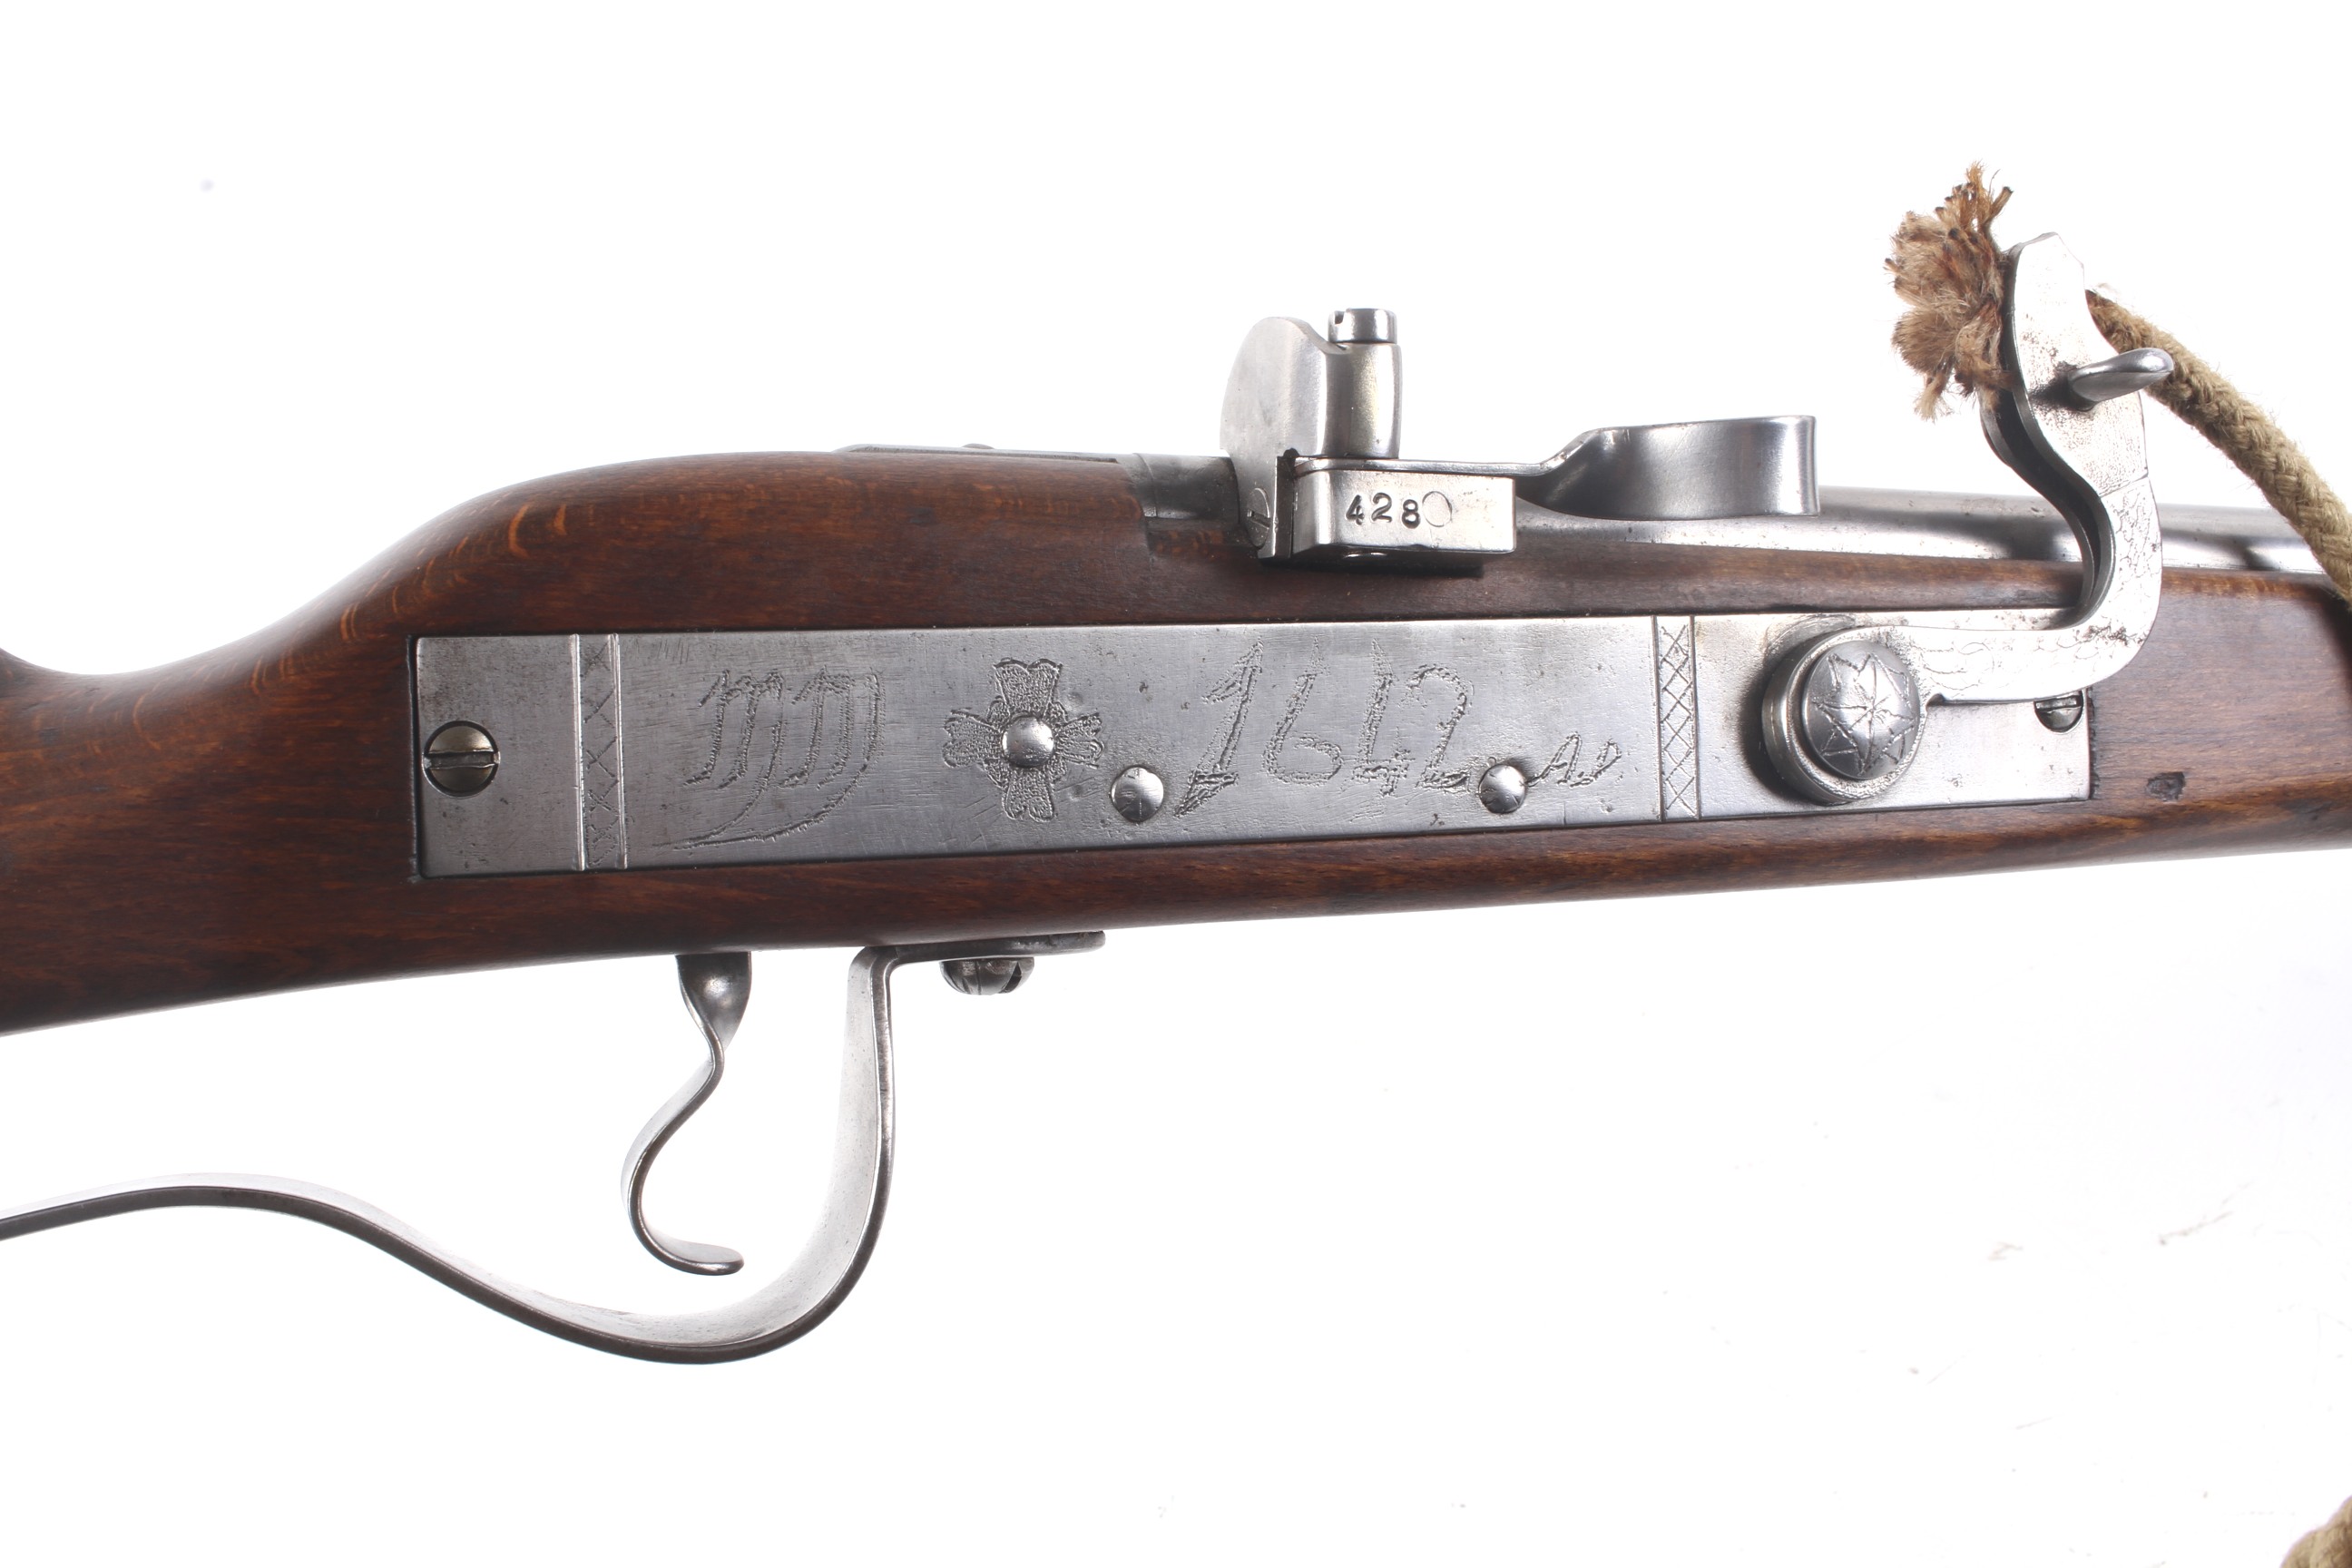 A shootable reproduction of a match lock muzzle loading musket. - Image 3 of 3